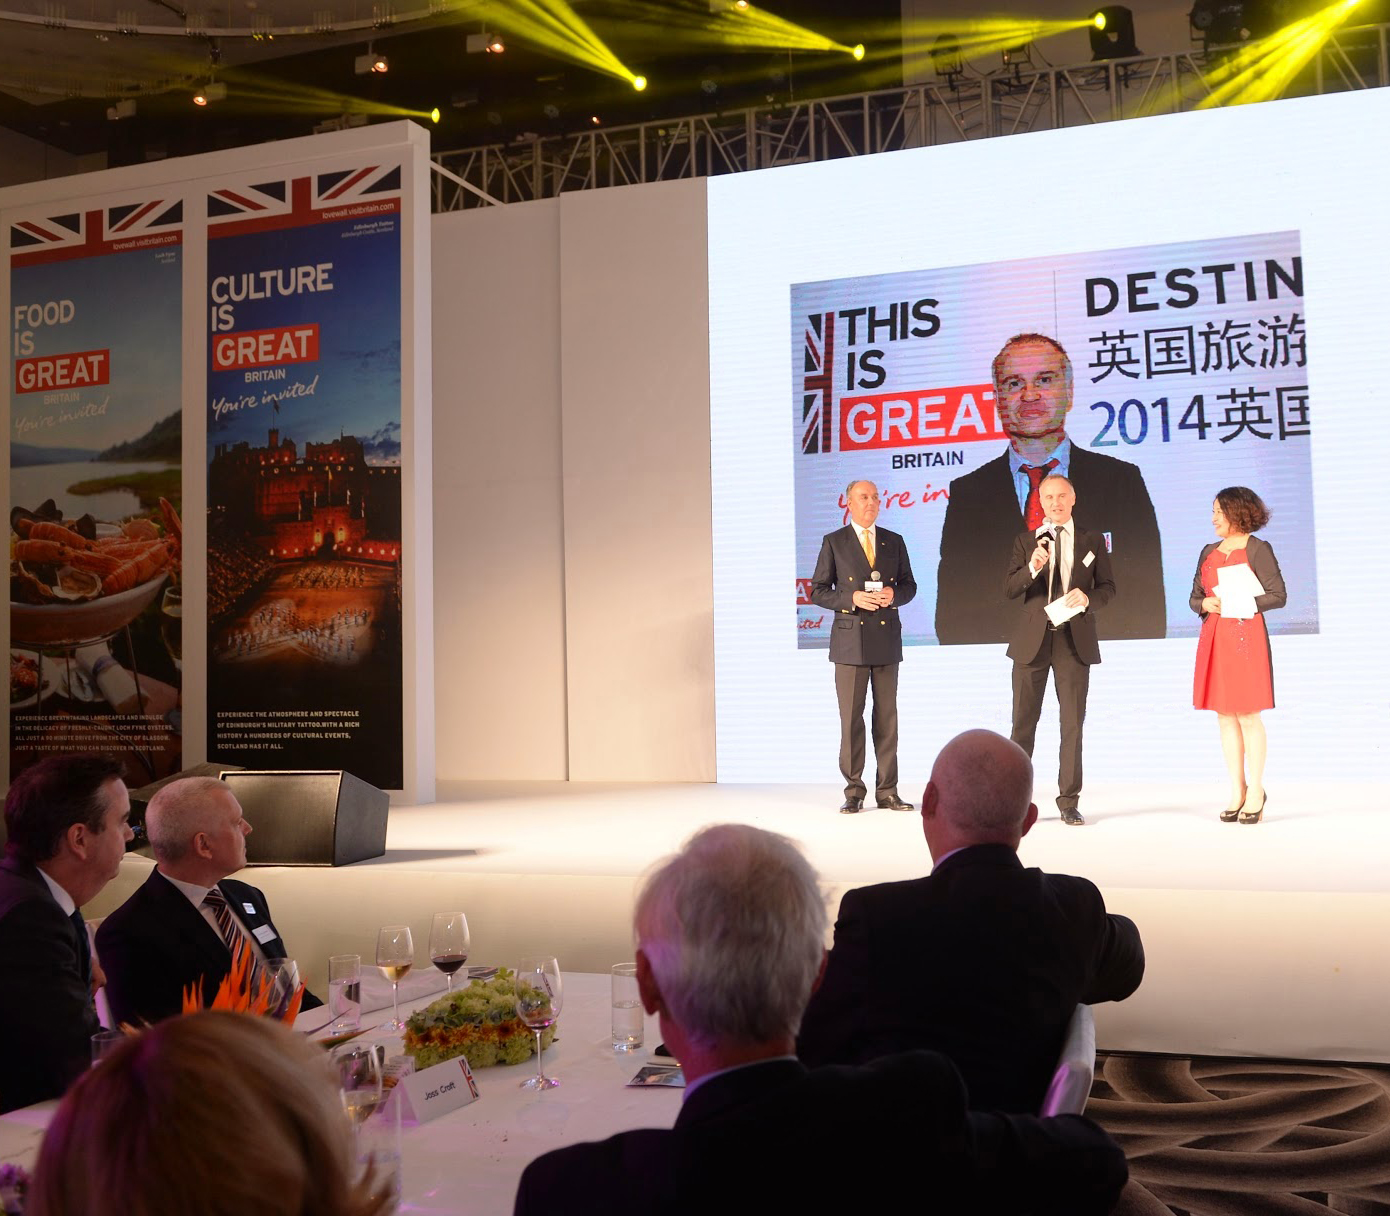 Colin Fox promoting the UK as Destination of choice 